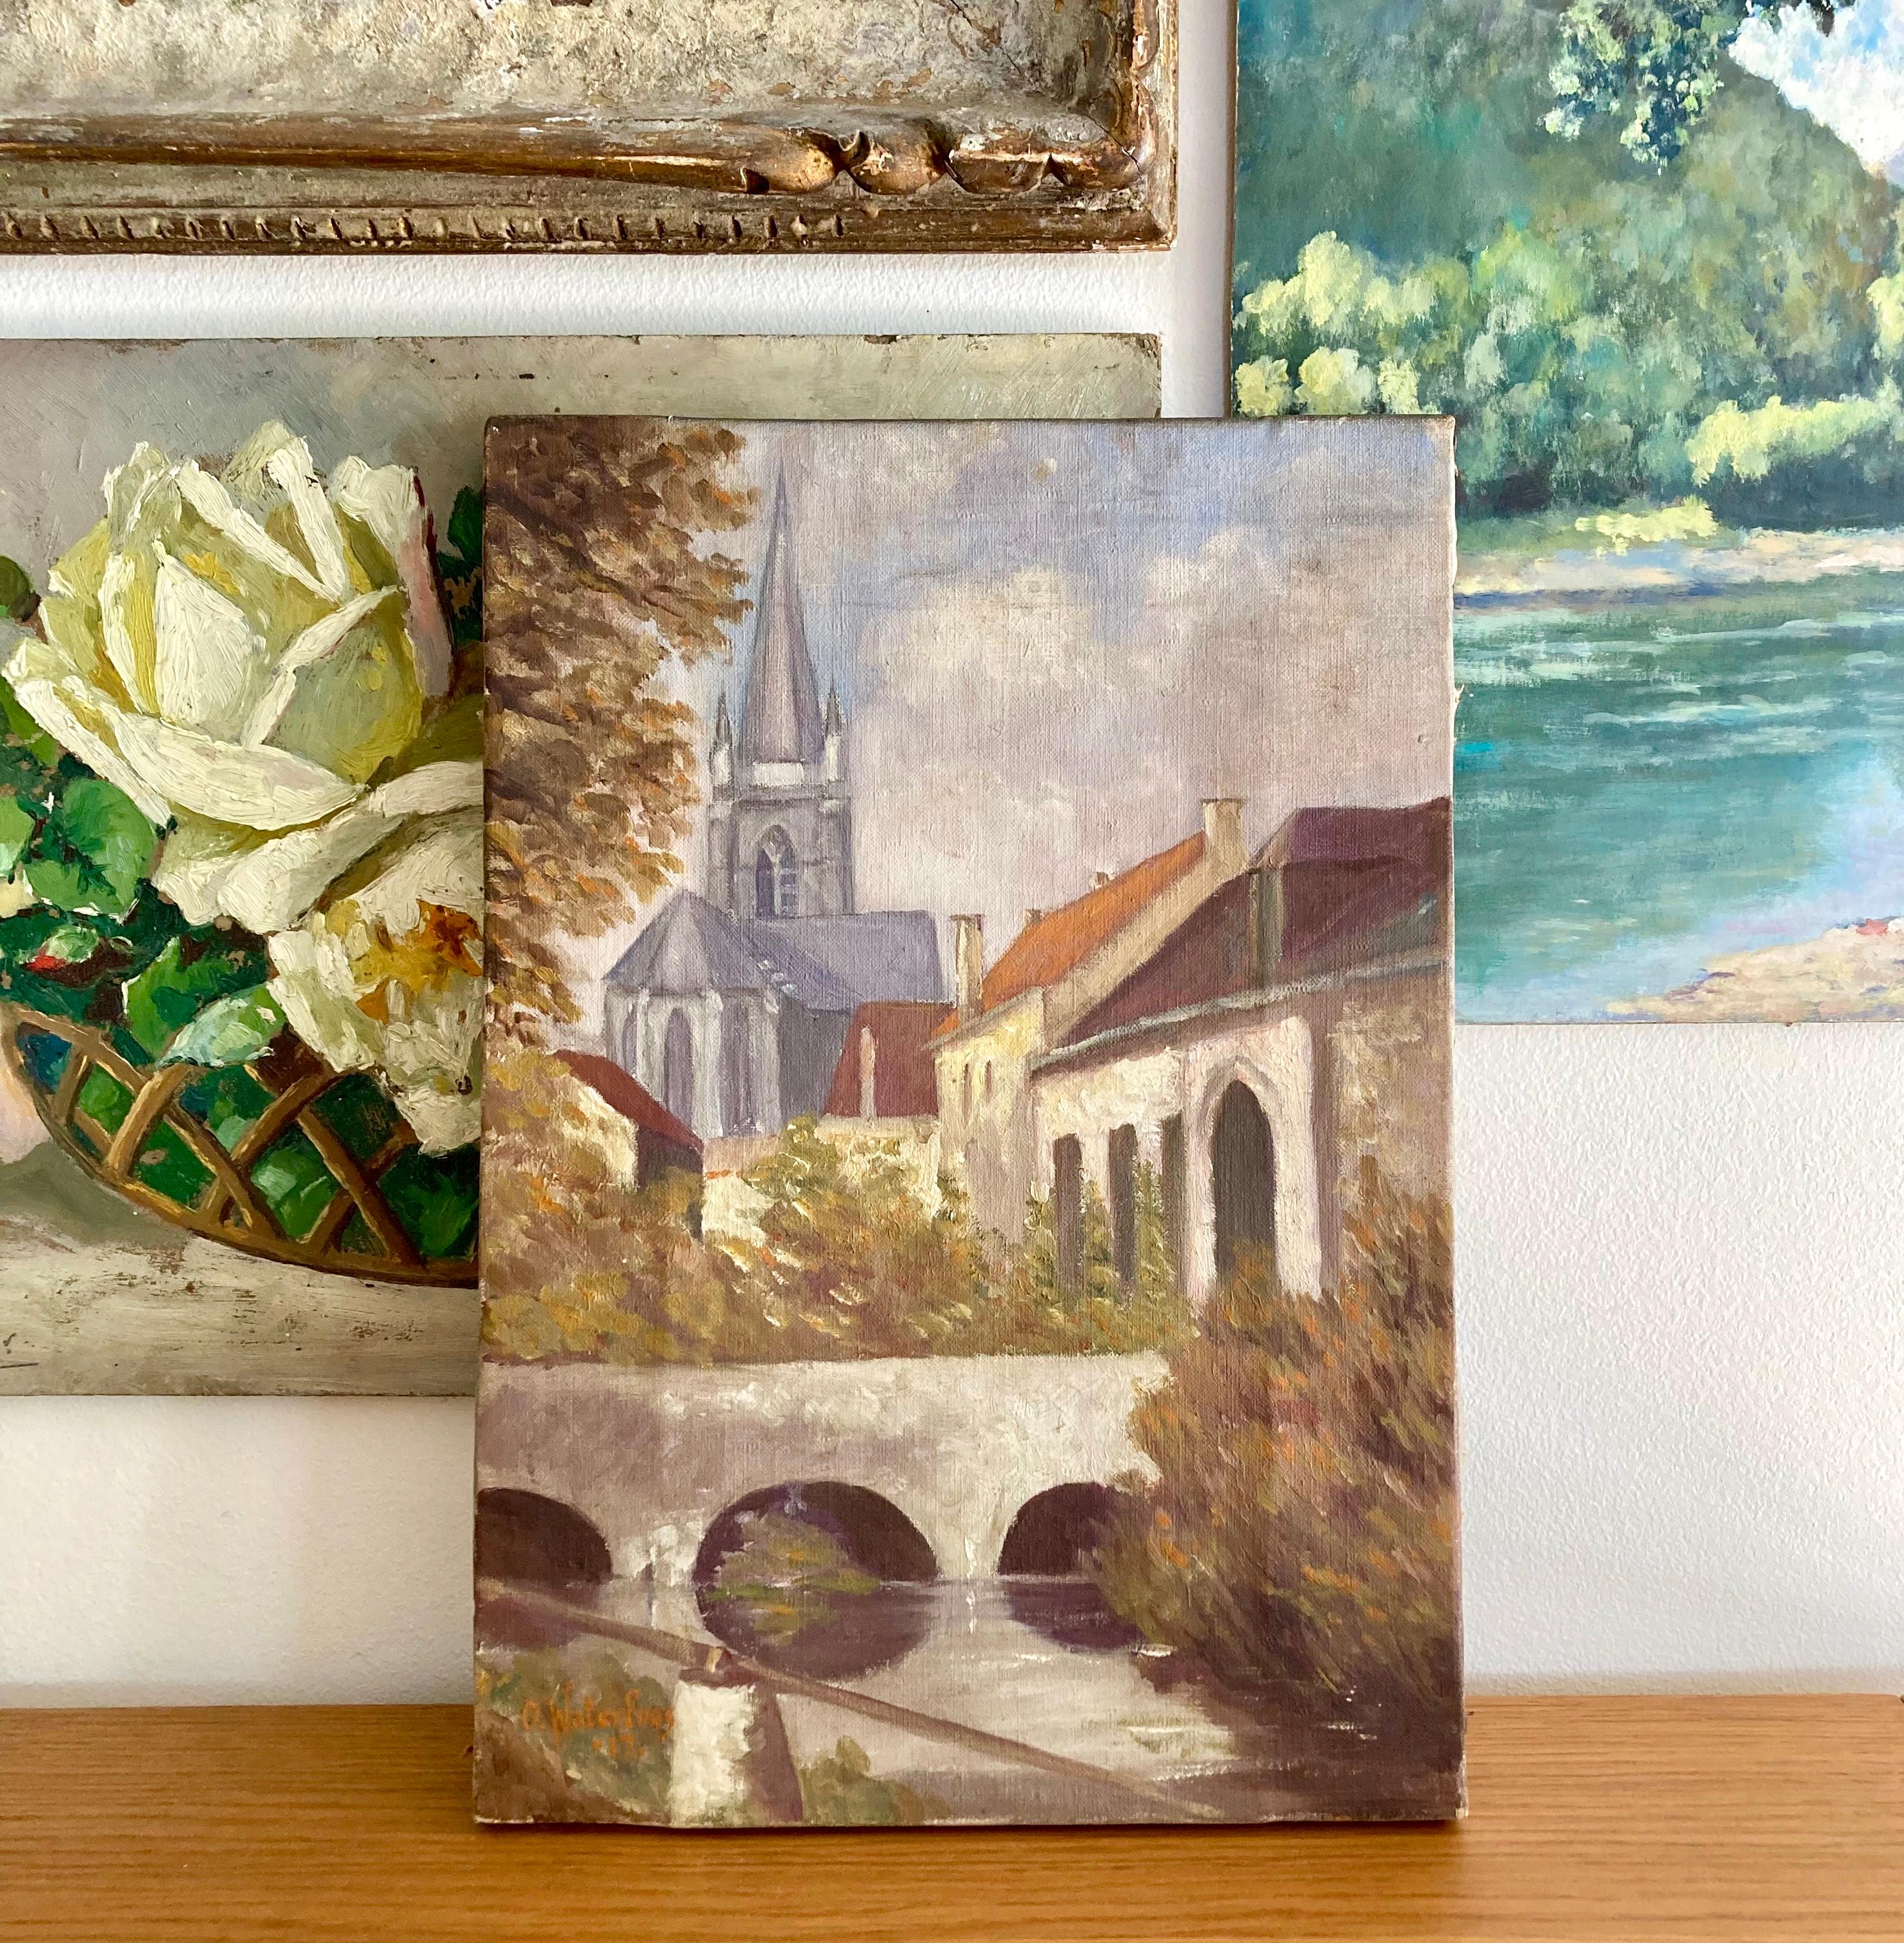 An authentic, antique, Belgian oil painting on stretched canvas. It is signed by the artist, O. Waterloos, and dated 1917 in the lower left corner (see photo). It depicts a lovely, old European town, possibly the town of Bruges in Belgium, with a